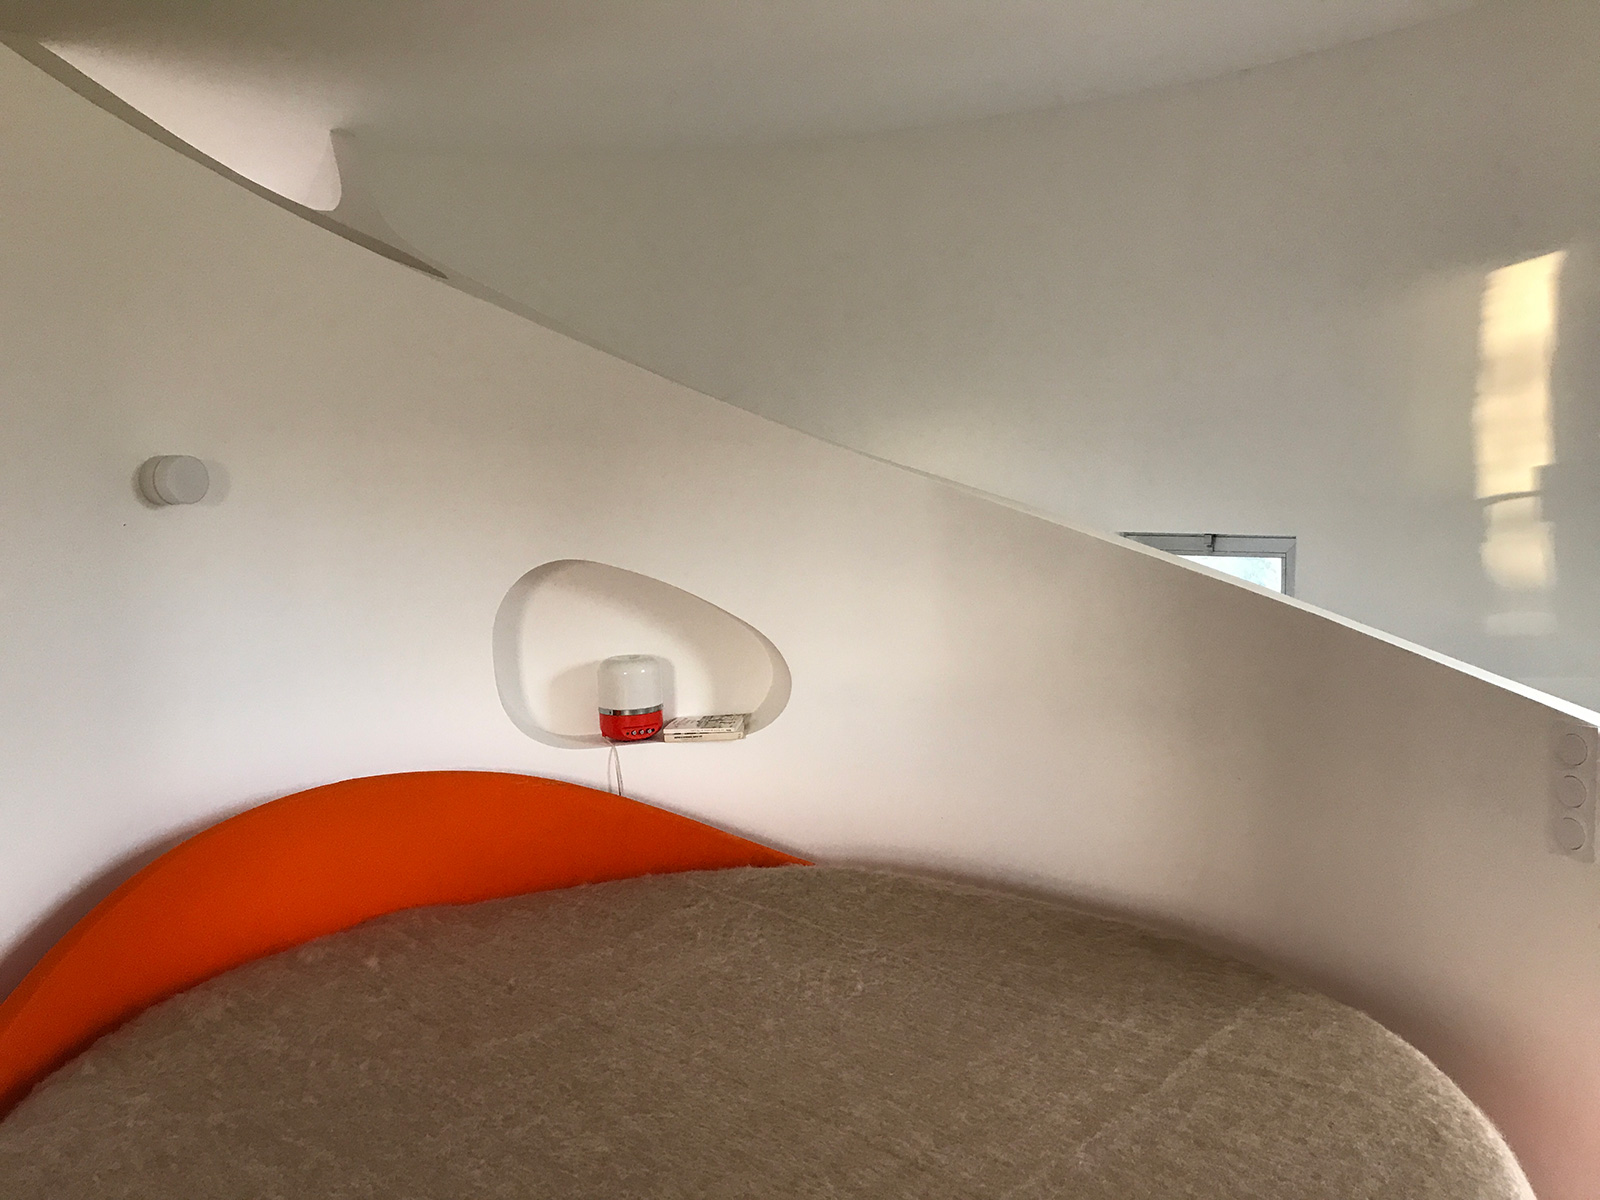 A swirling staircase inside the property